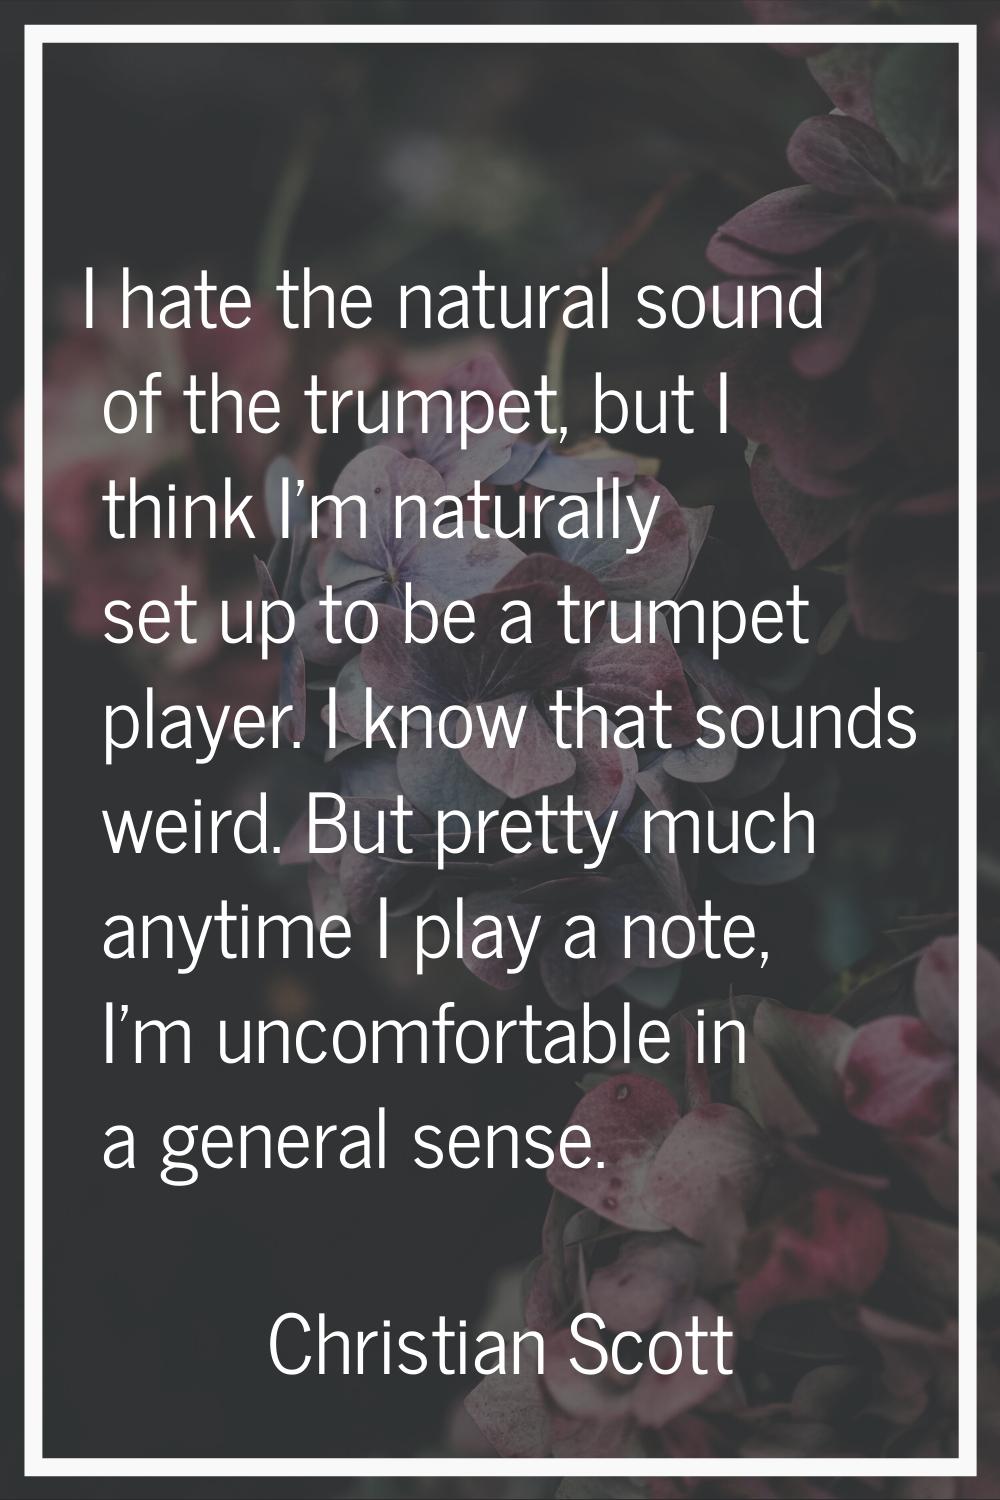 I hate the natural sound of the trumpet, but I think I'm naturally set up to be a trumpet player. I